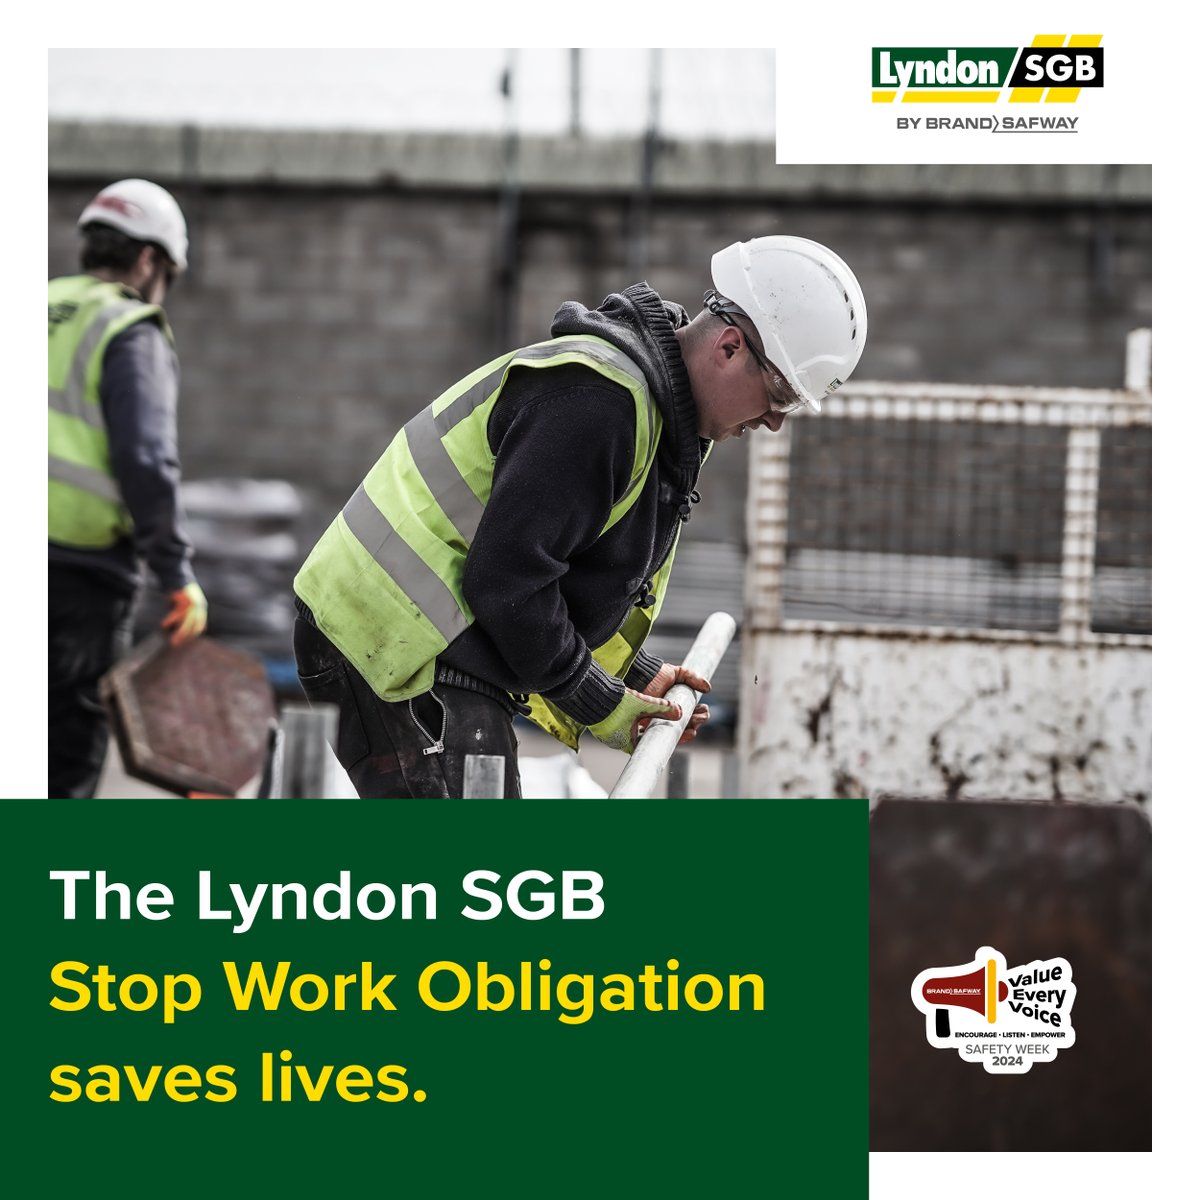 During this @SafetyWeek_2024 #constructionsafetyweek we wish to highlight our #ValueEveryVoice initiative 🗣️ At the core is our ‘stop work obligation’ – empowering ALL to stop any project, at any point, for any unsafe element 🦺 #LyndonSGB #WeAreOne #MoreSafety